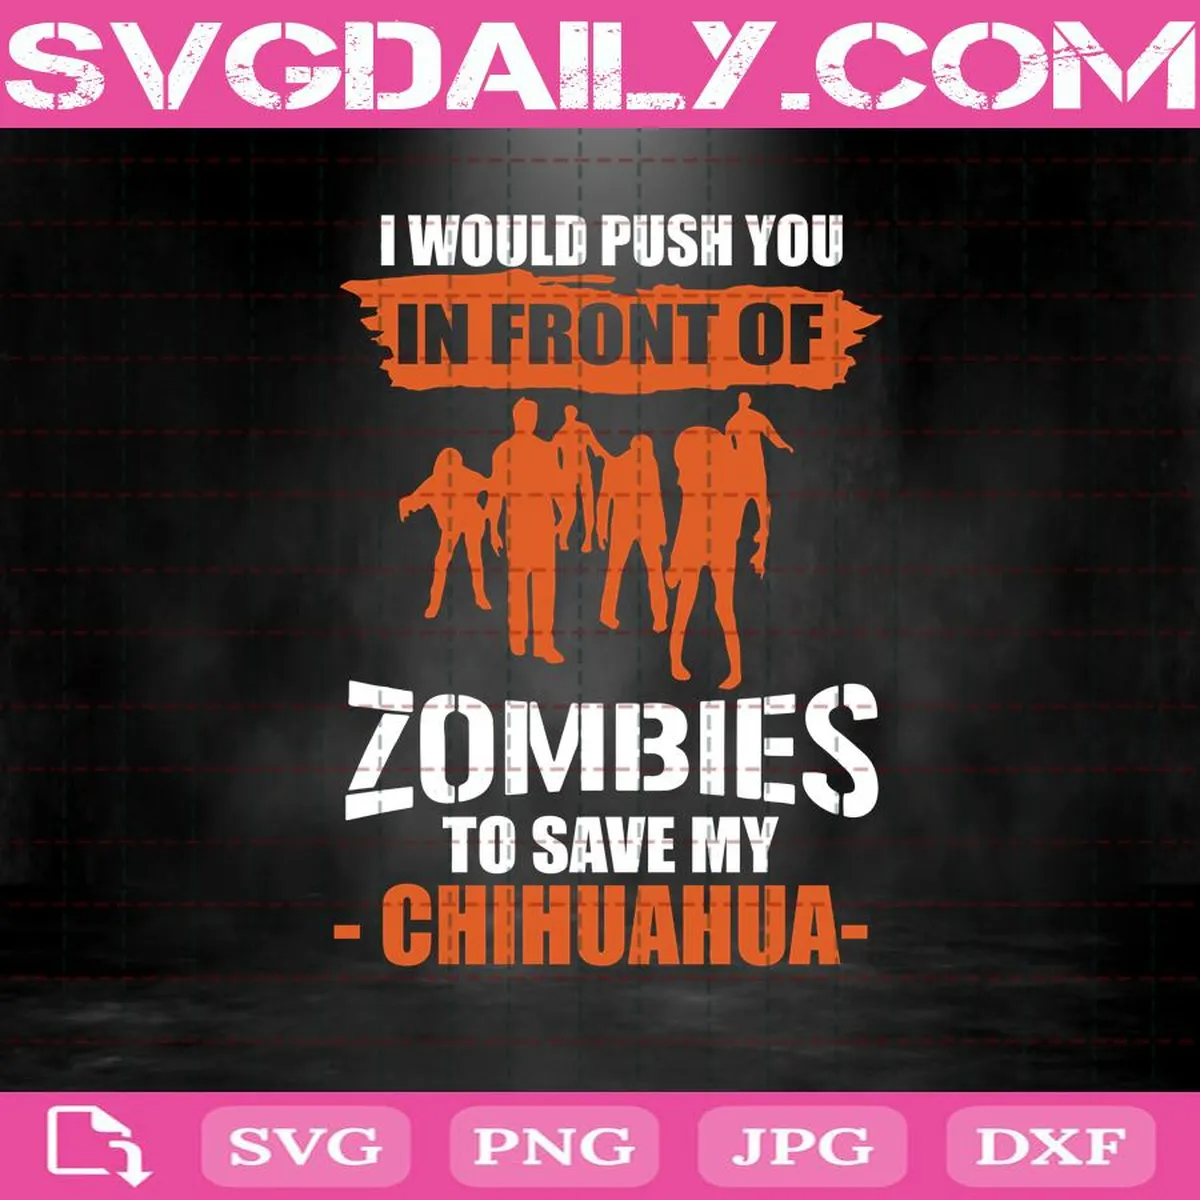 I Would Push You In Front Of Zombies To Save Chihuahua Svg, Zombies Svg, Chihuahua Svg, Svg Png Dxf Eps Download Files